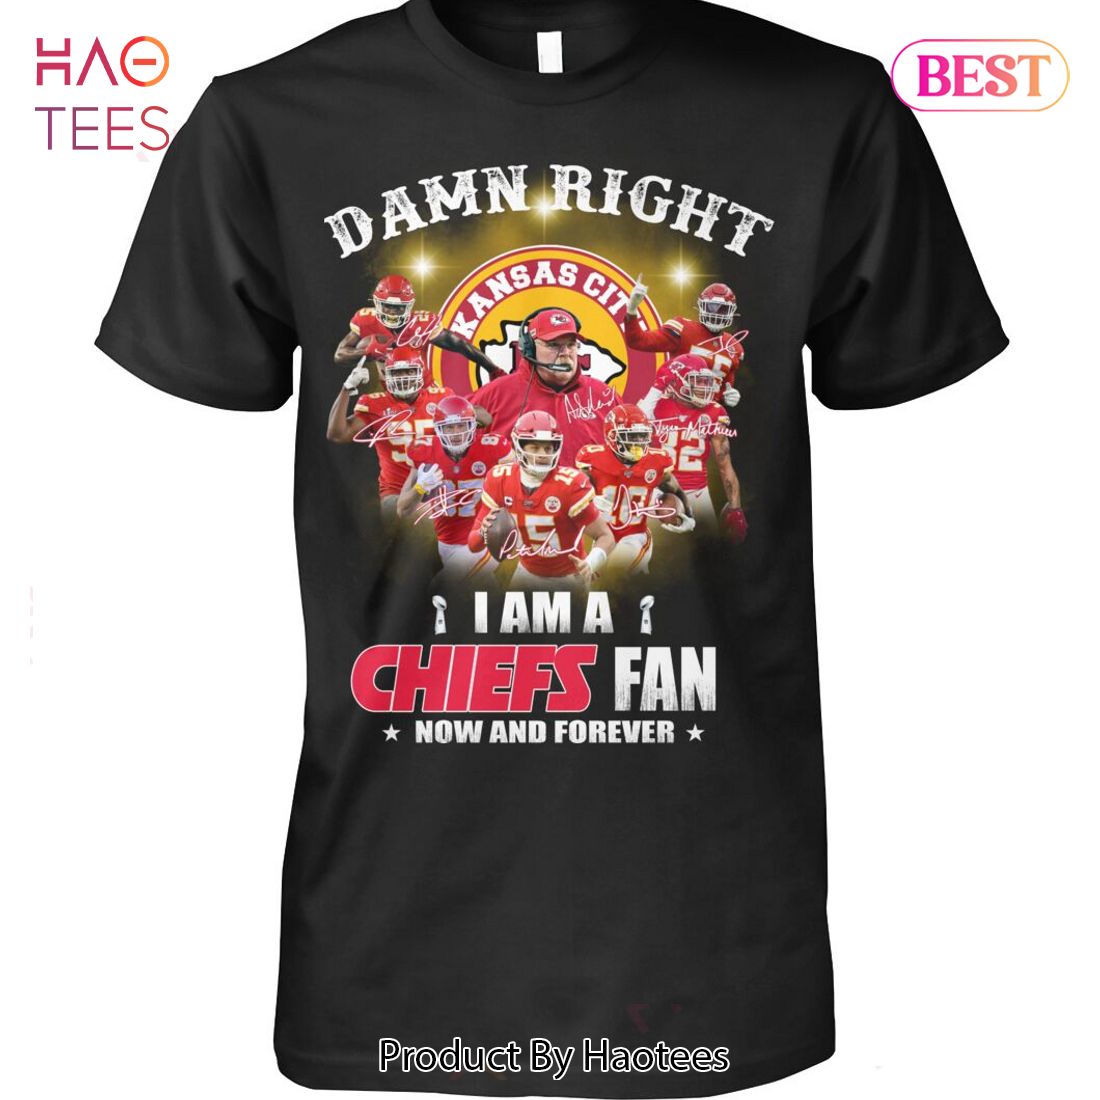 HOT TREND Damn Right I Am A Kansas City Chiefs Fan Now And Forever Unisex T-Shirt